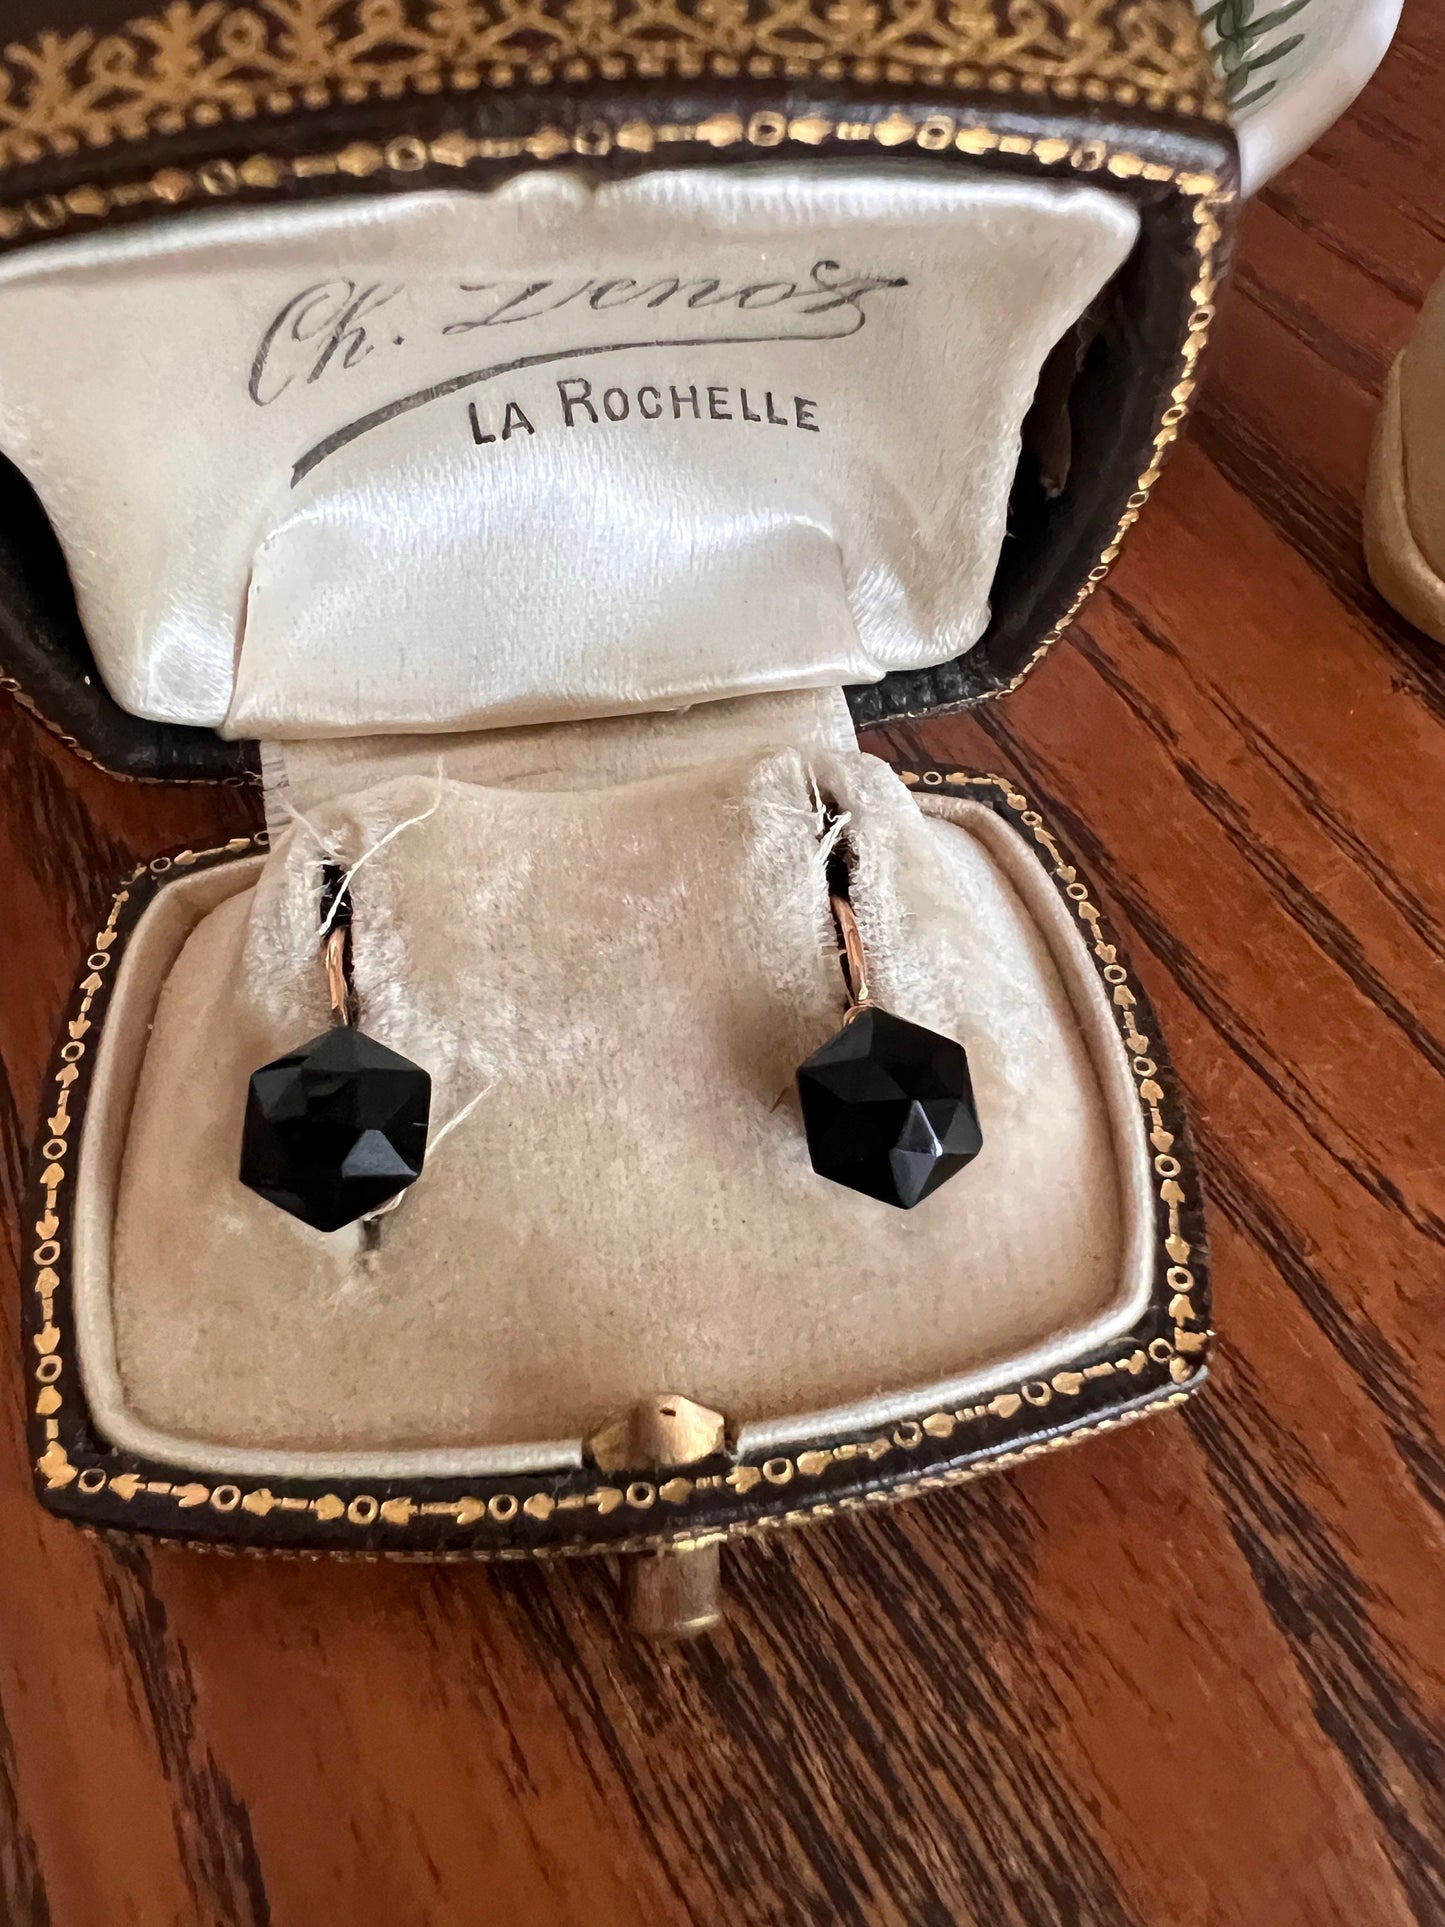 HEXAGON Faceted Black Onyx Jet? French Antique Geometric Victorian Art Nouveau Earrings 18k Gold Mourning Dangle Dormeuse Belle Epoque Gift